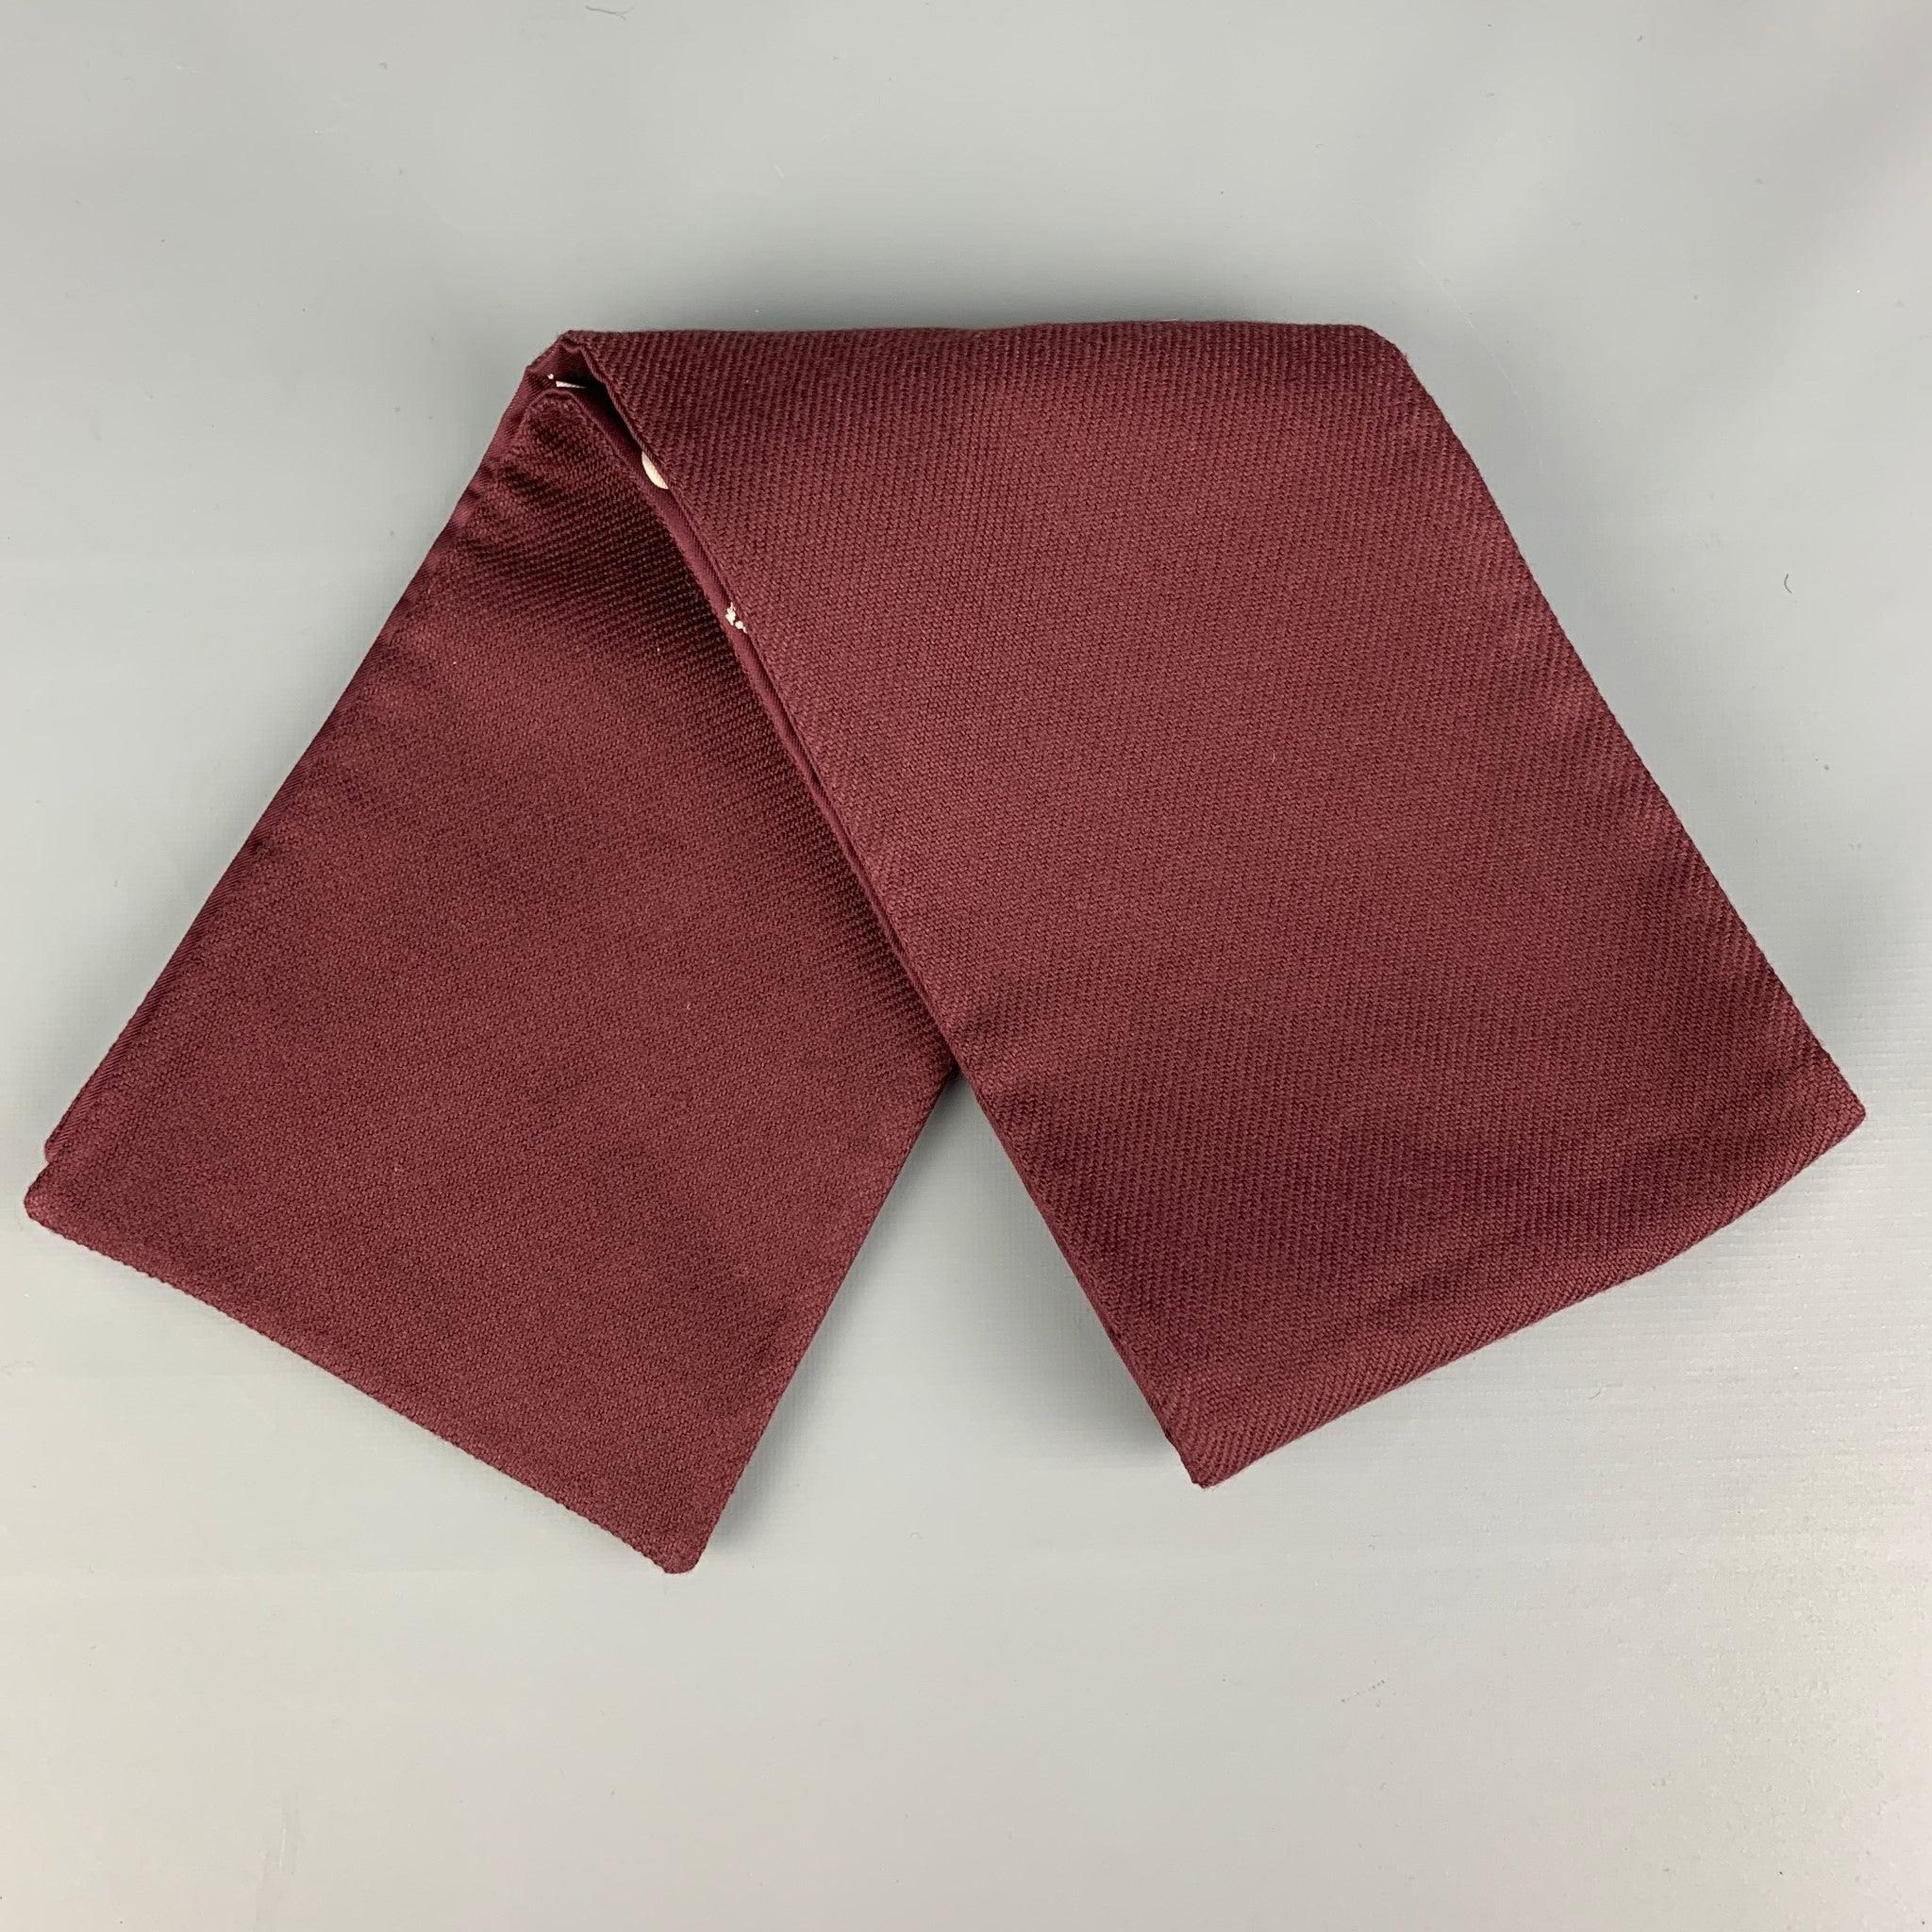 BURBERRY PRORSUM scarf comes in a burgundy & white heart print silk / wool. Made in Italy.
Excellent Pre-Owned Condition.
 

Measurements: 
  41 inches  x 6 inches  
  
  
 
Reference: 118896
Category: Scarves
More Details
    
Brand:  BURBERRY